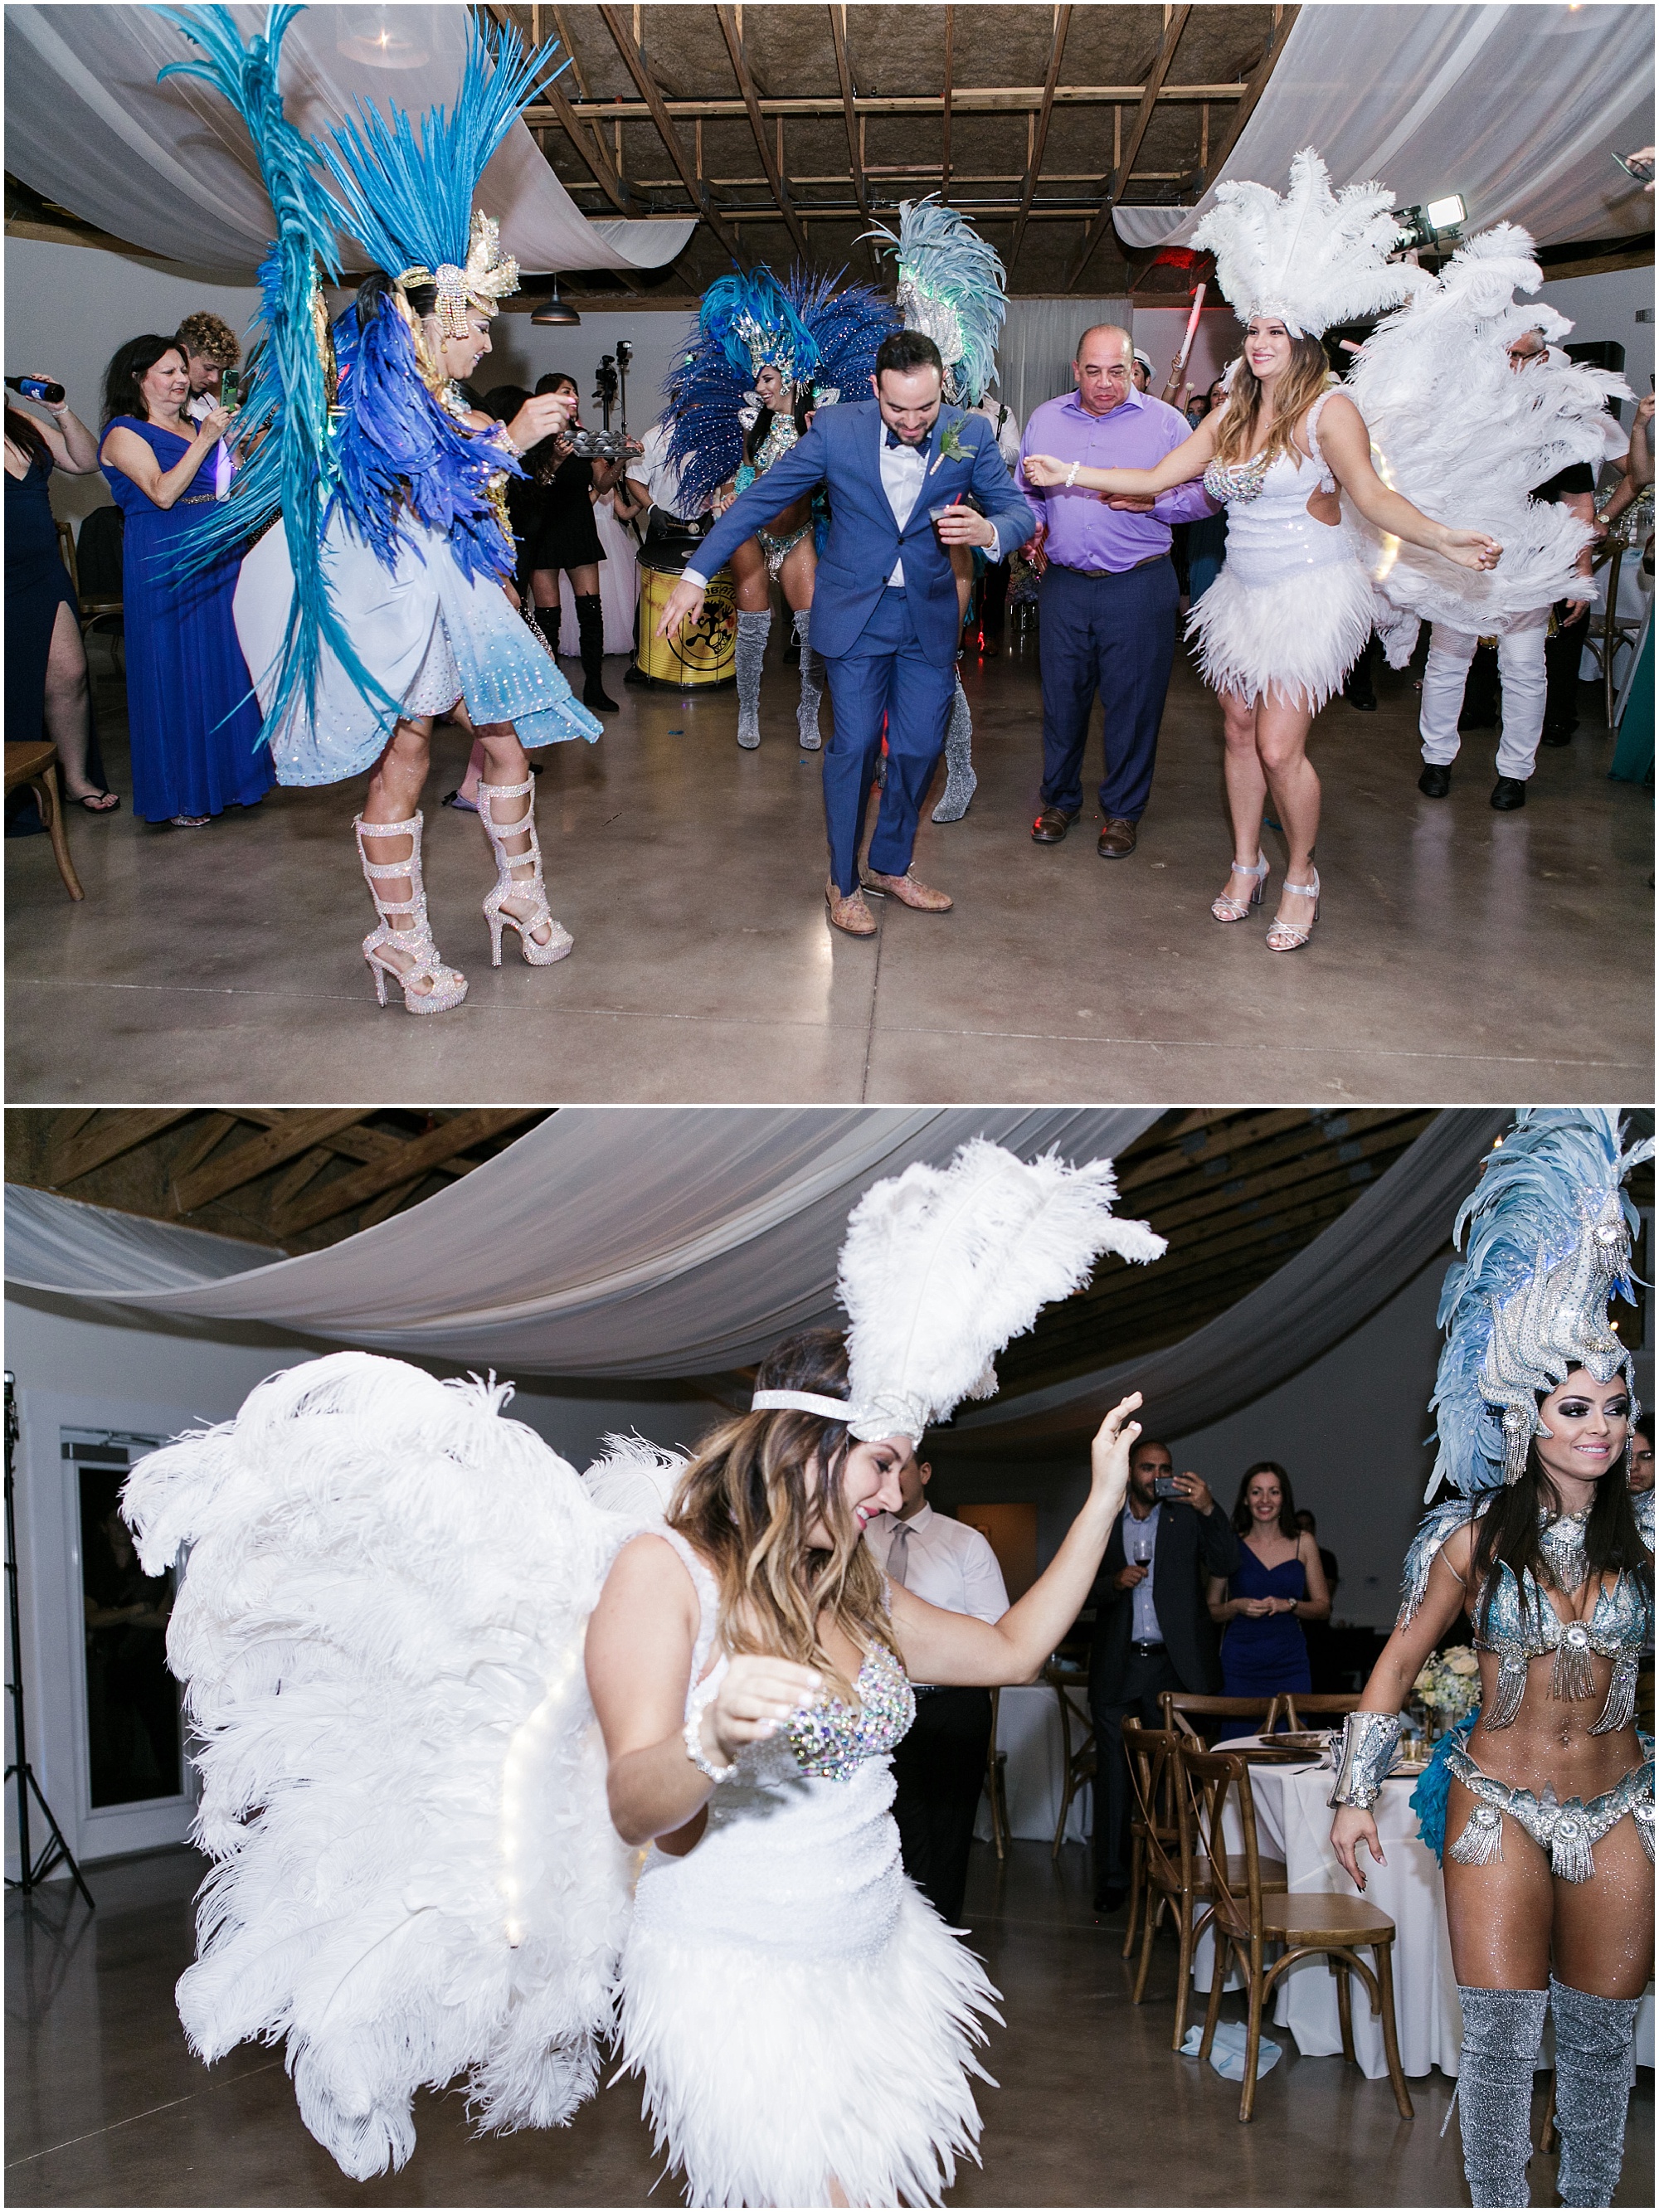 Bride and groom dancing with samba dancers and drummers